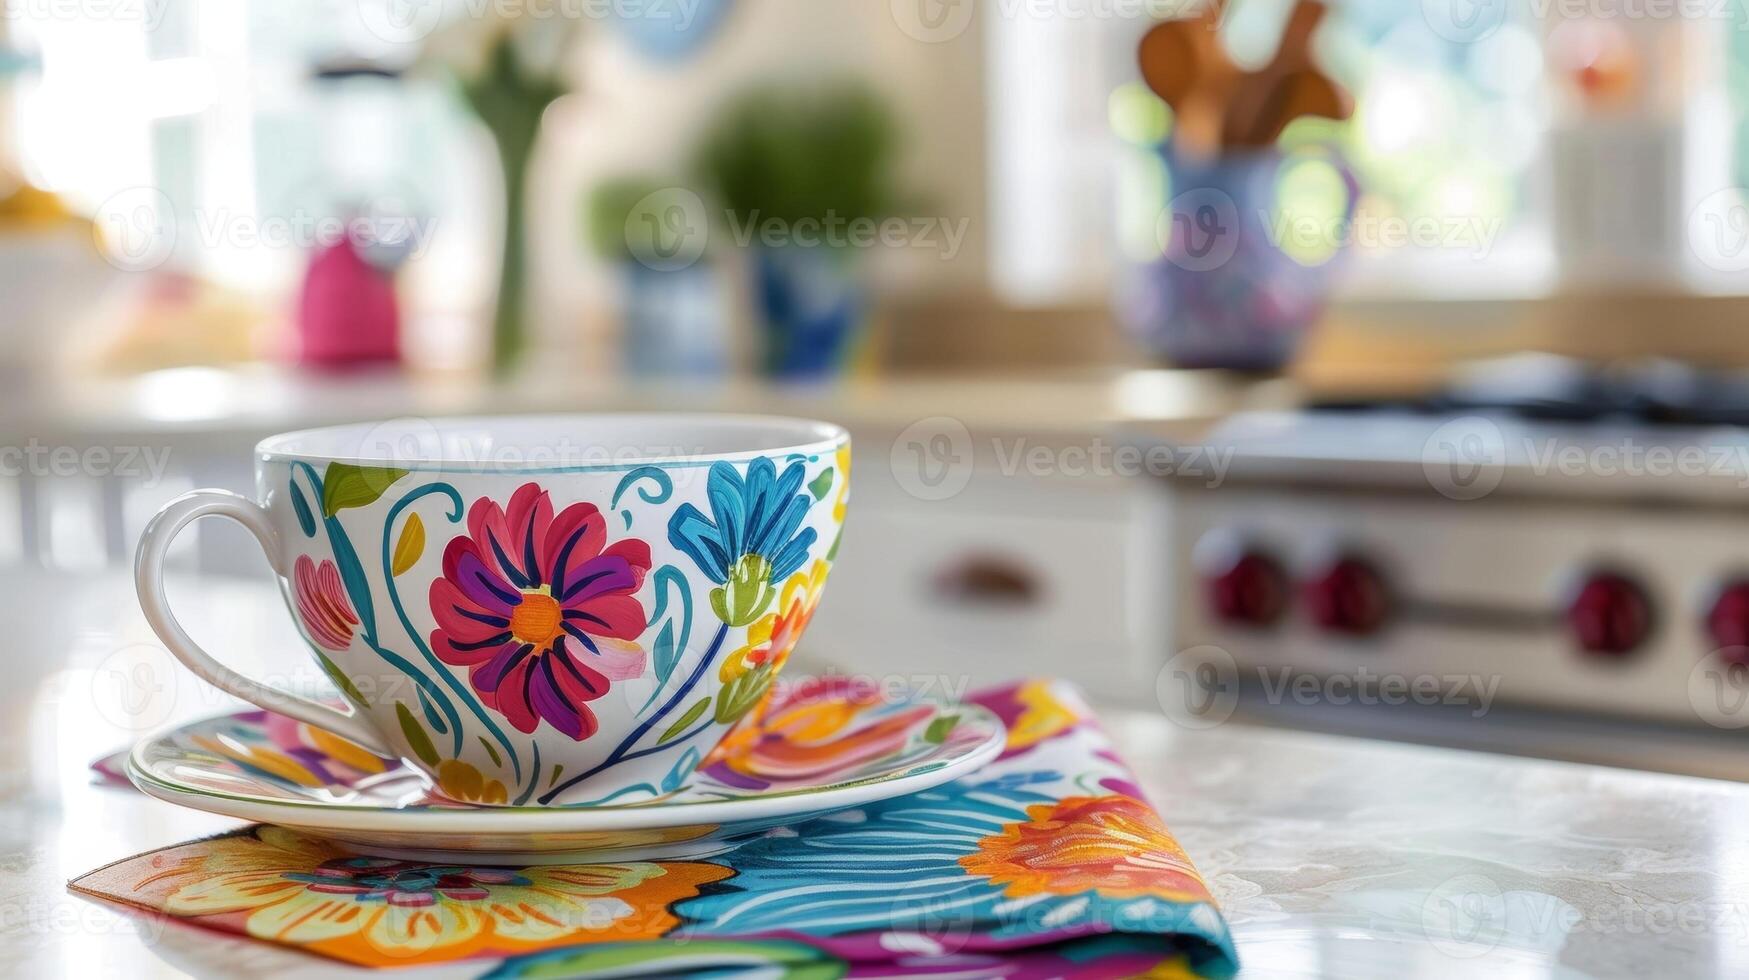 A closeup of a handpainted ceramic s rest in vibrant floral patterns adding a pop of color to a neutral kitchen. photo